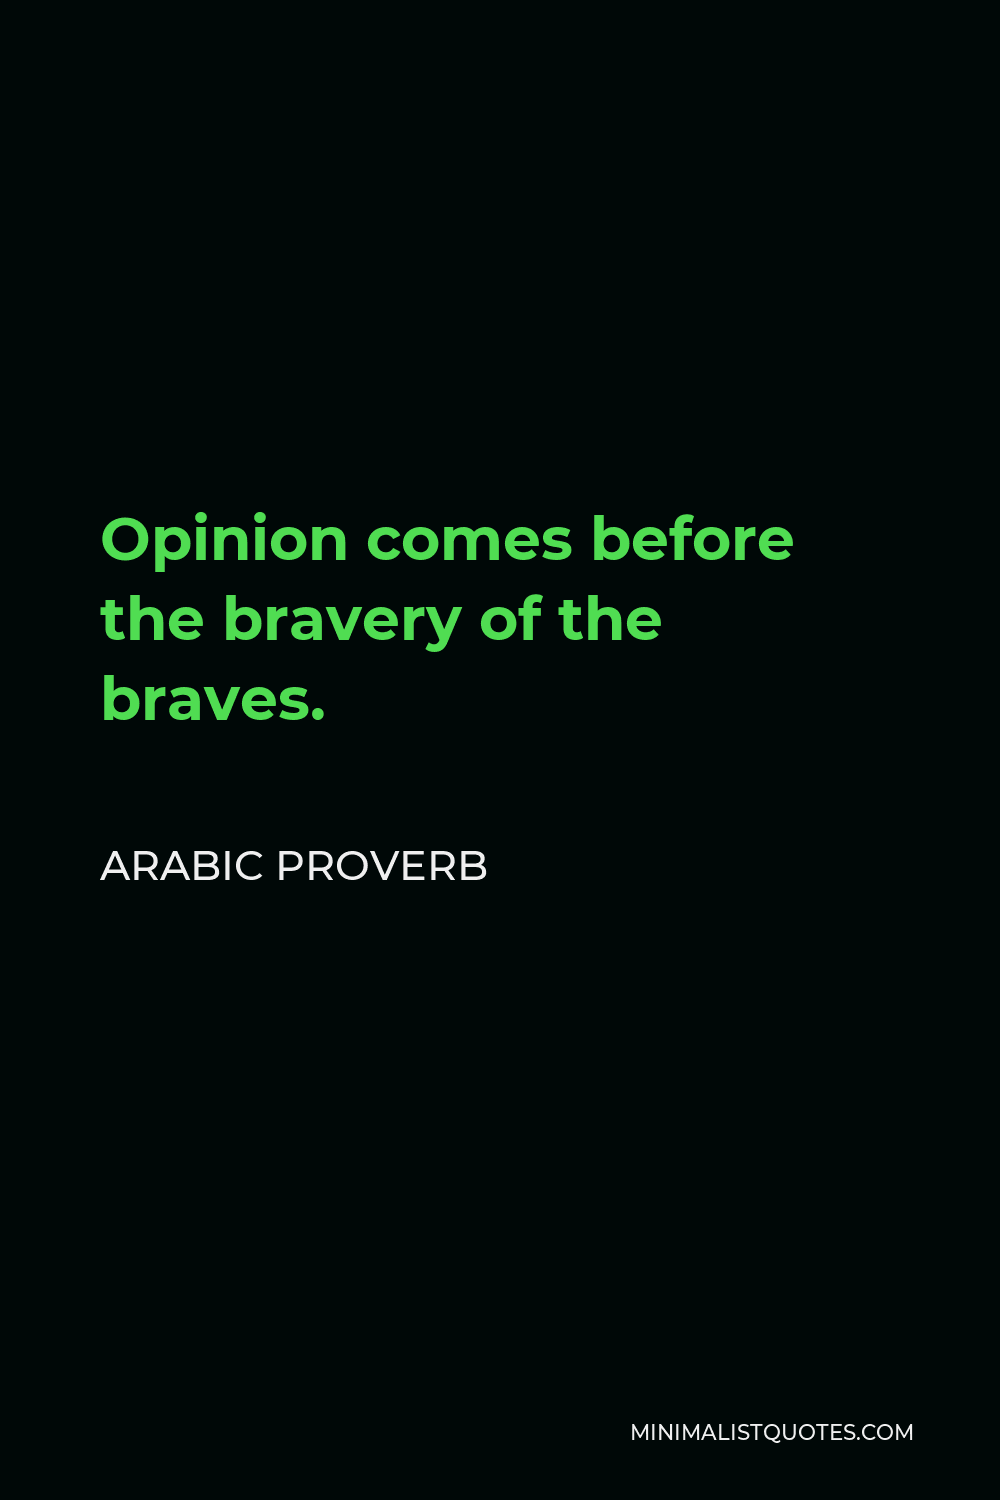 Arabic Proverb Quote - Opinion comes before the bravery of the braves.